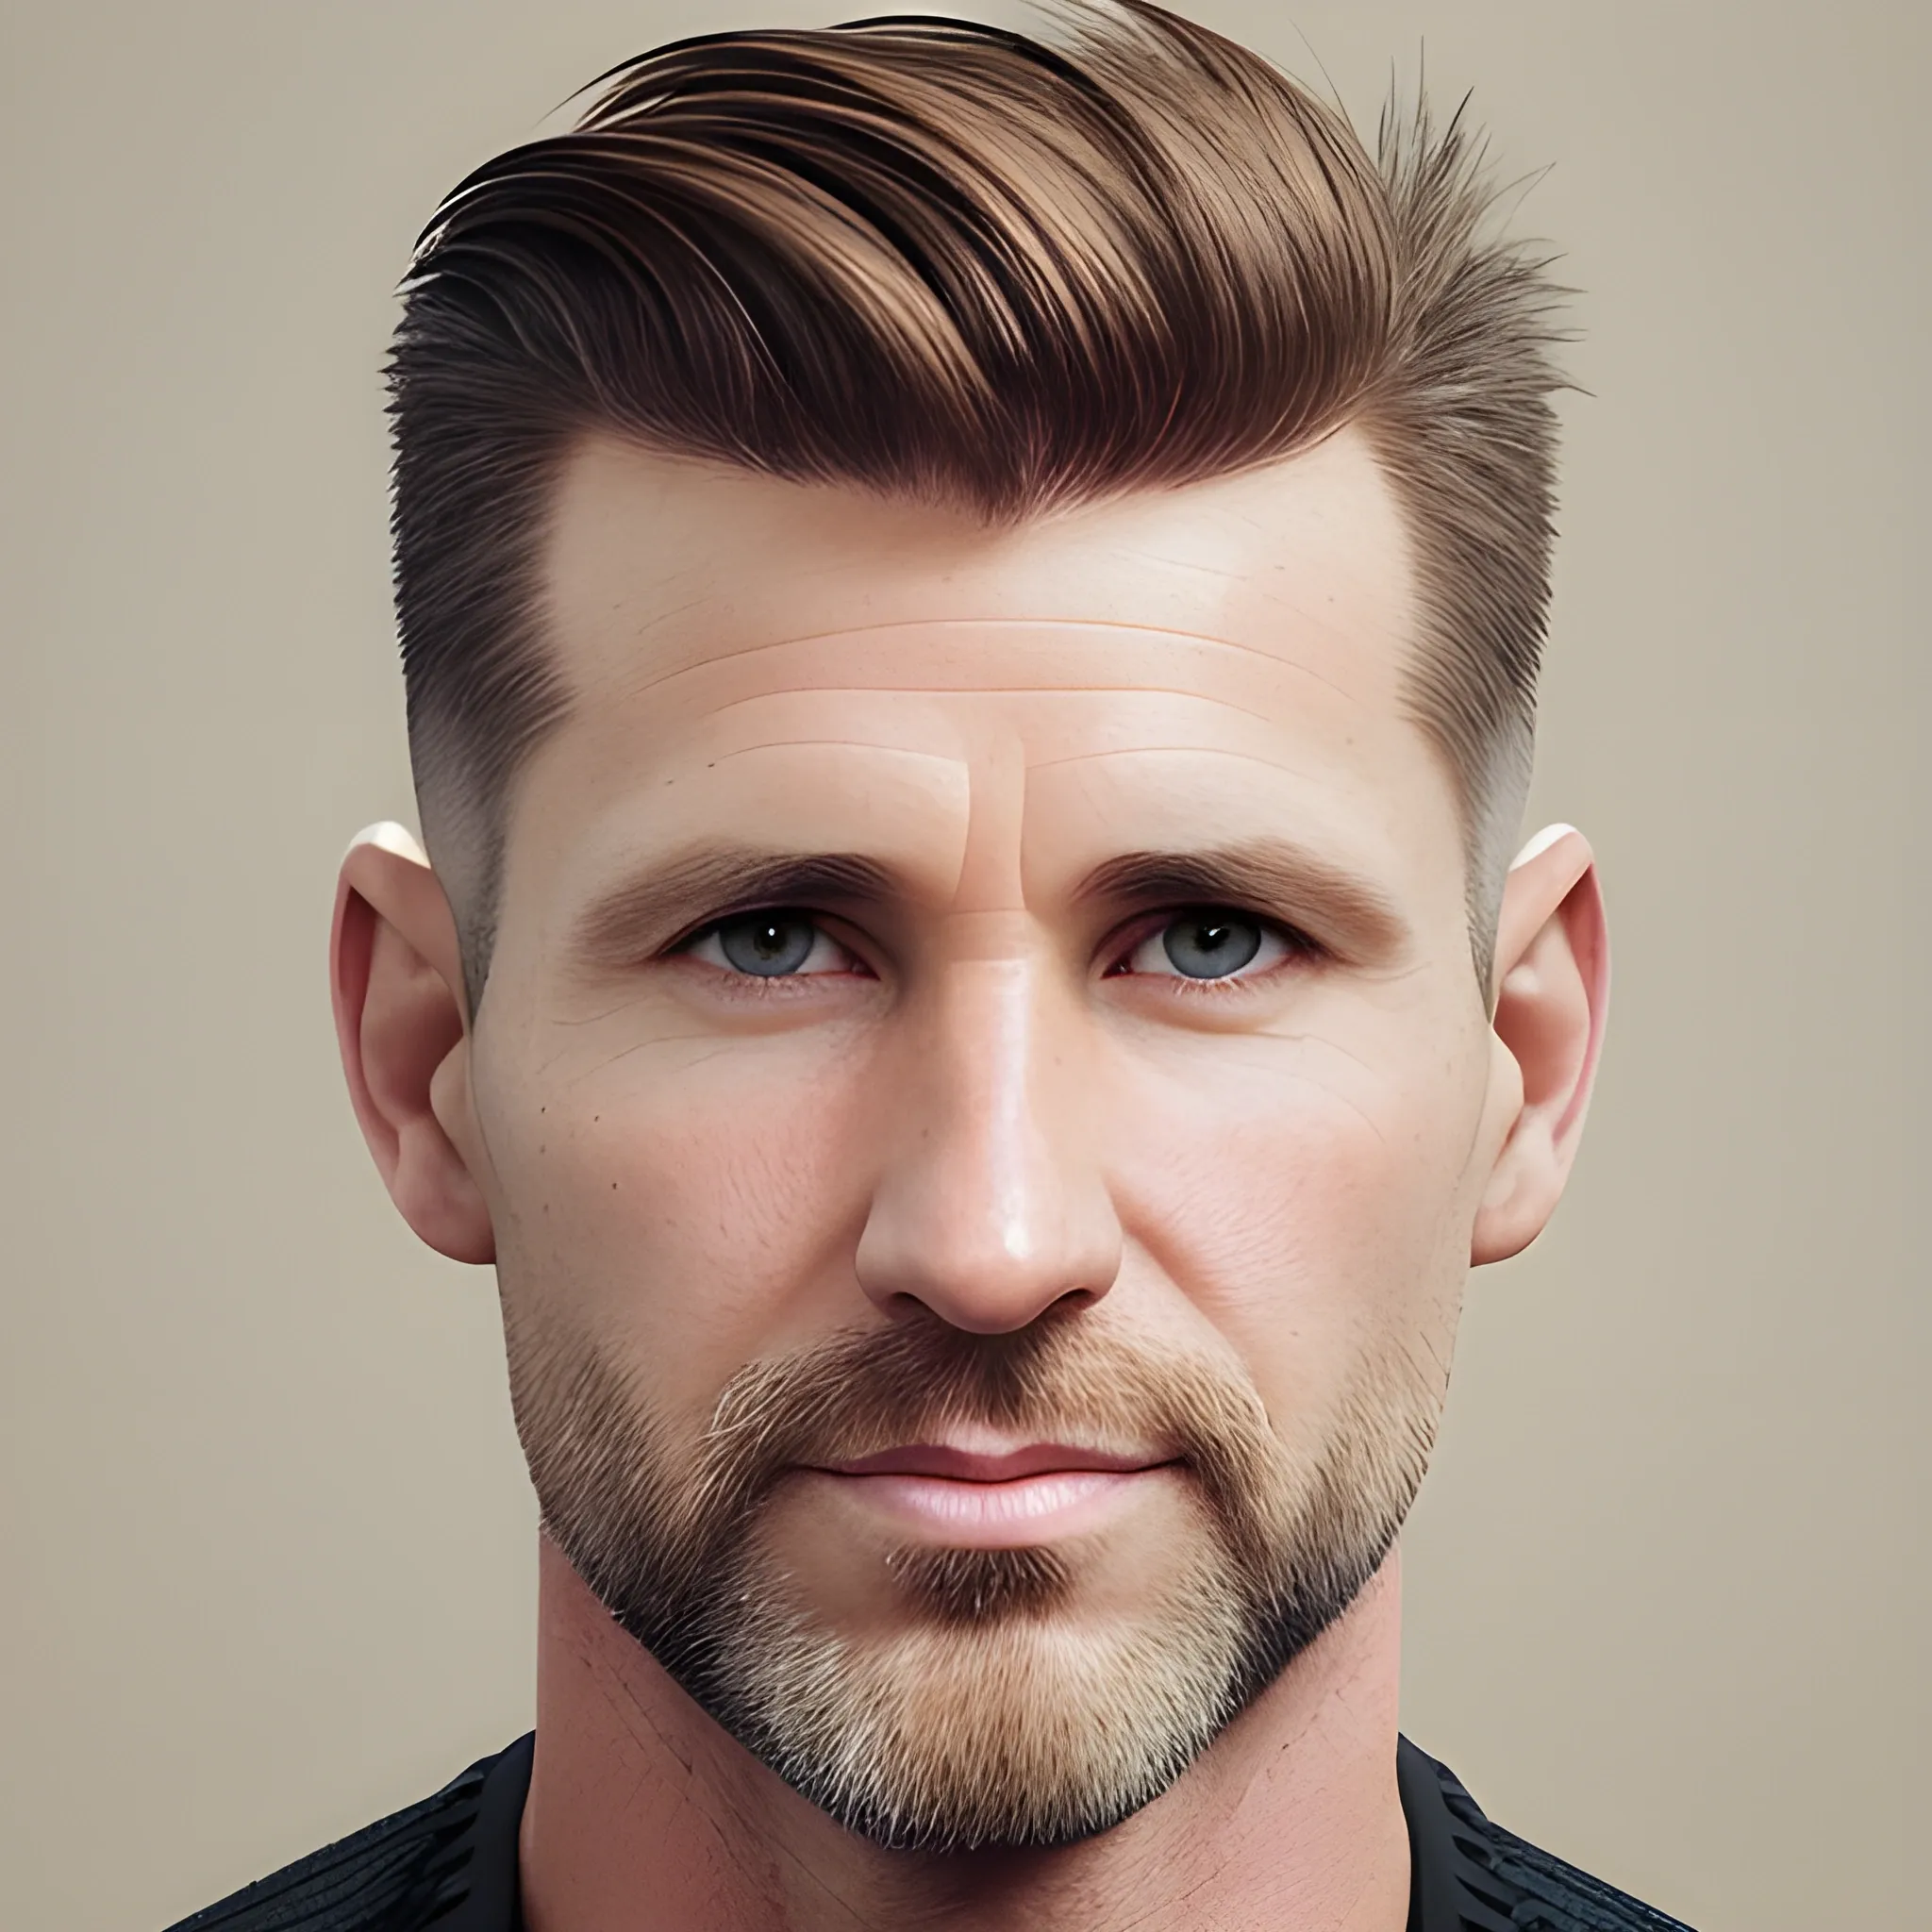 Portrait of 40 year old Caucasian male with very short brown hair coming to a peak in front with high fade for haircut with egg shaped head and no facial hair.